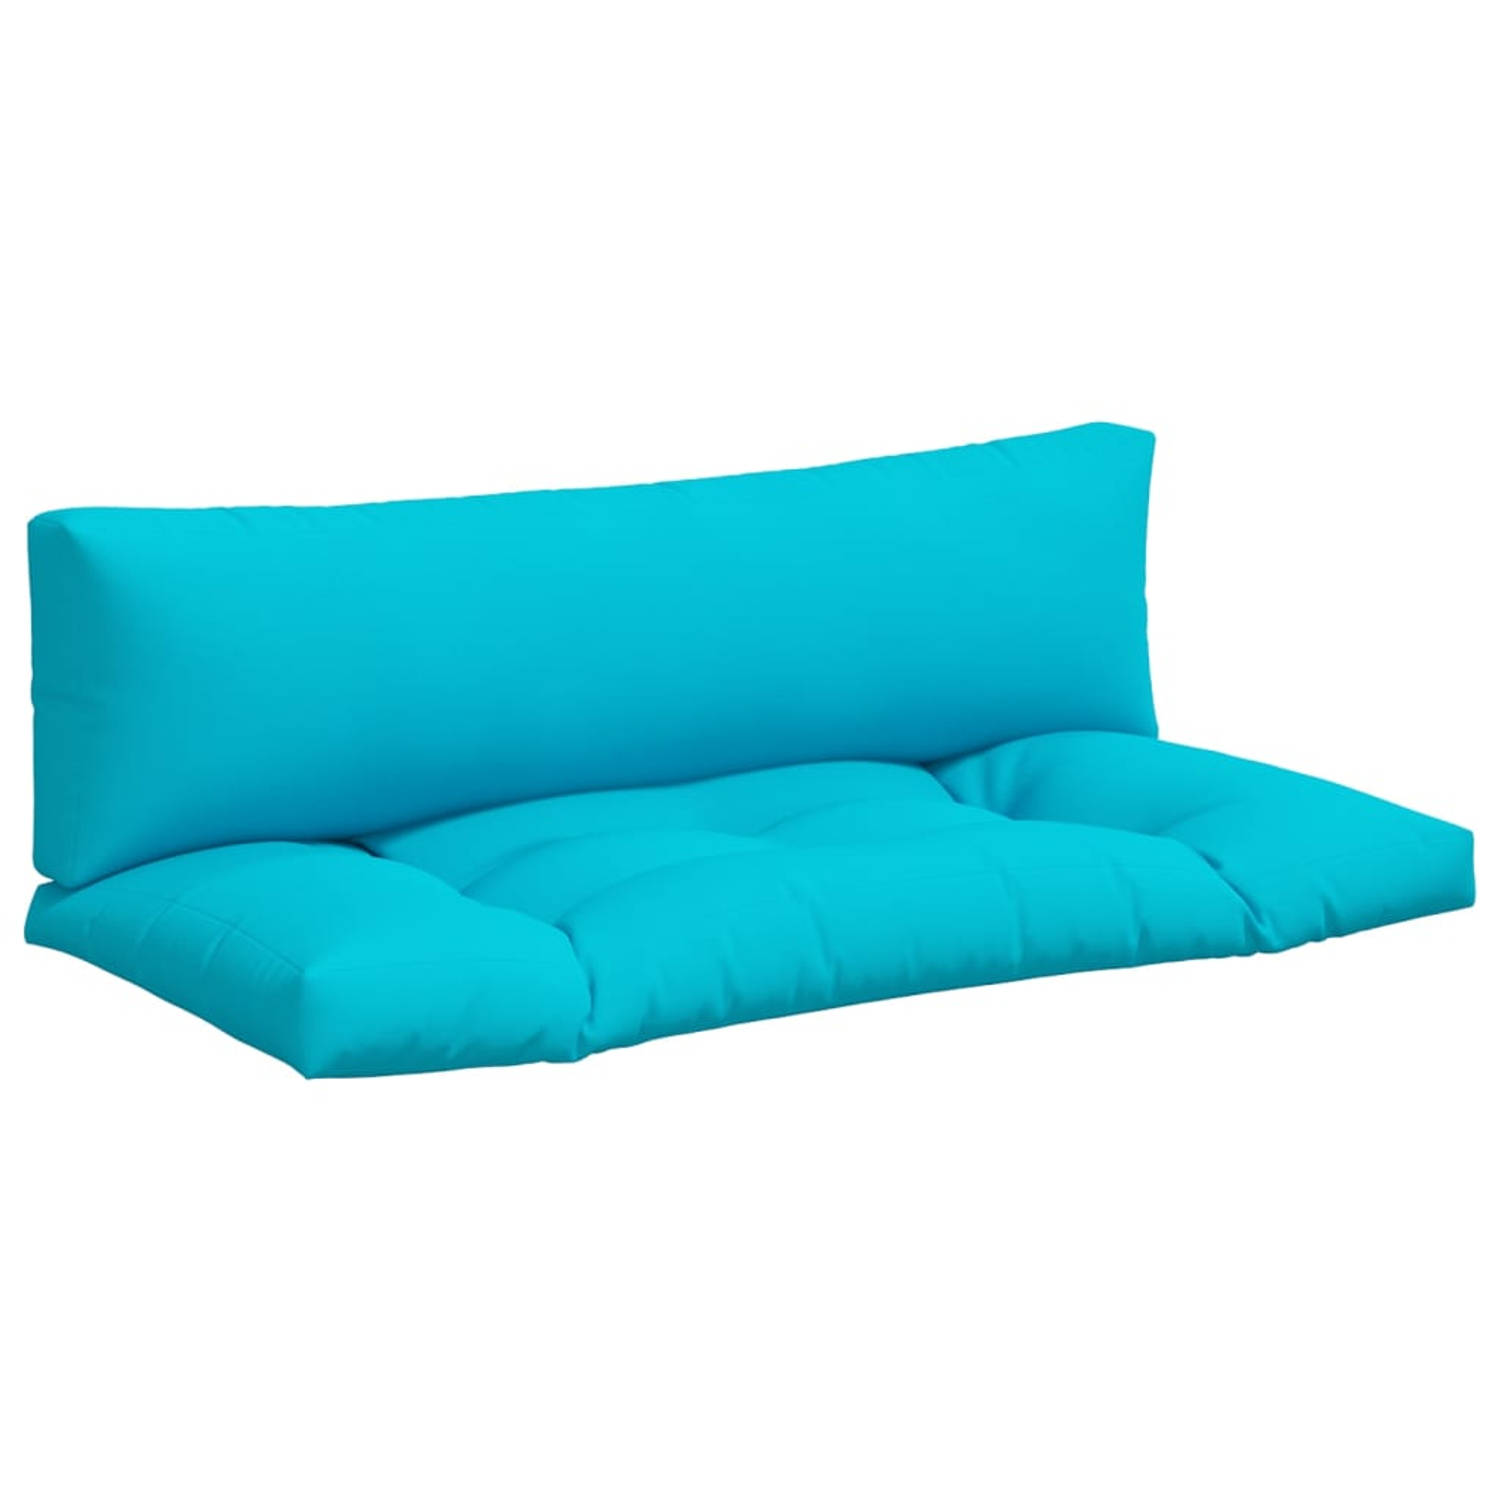 The Living Store Palletkussen - Oxford stof - 110 x 58 x 10 cm - Turquoise